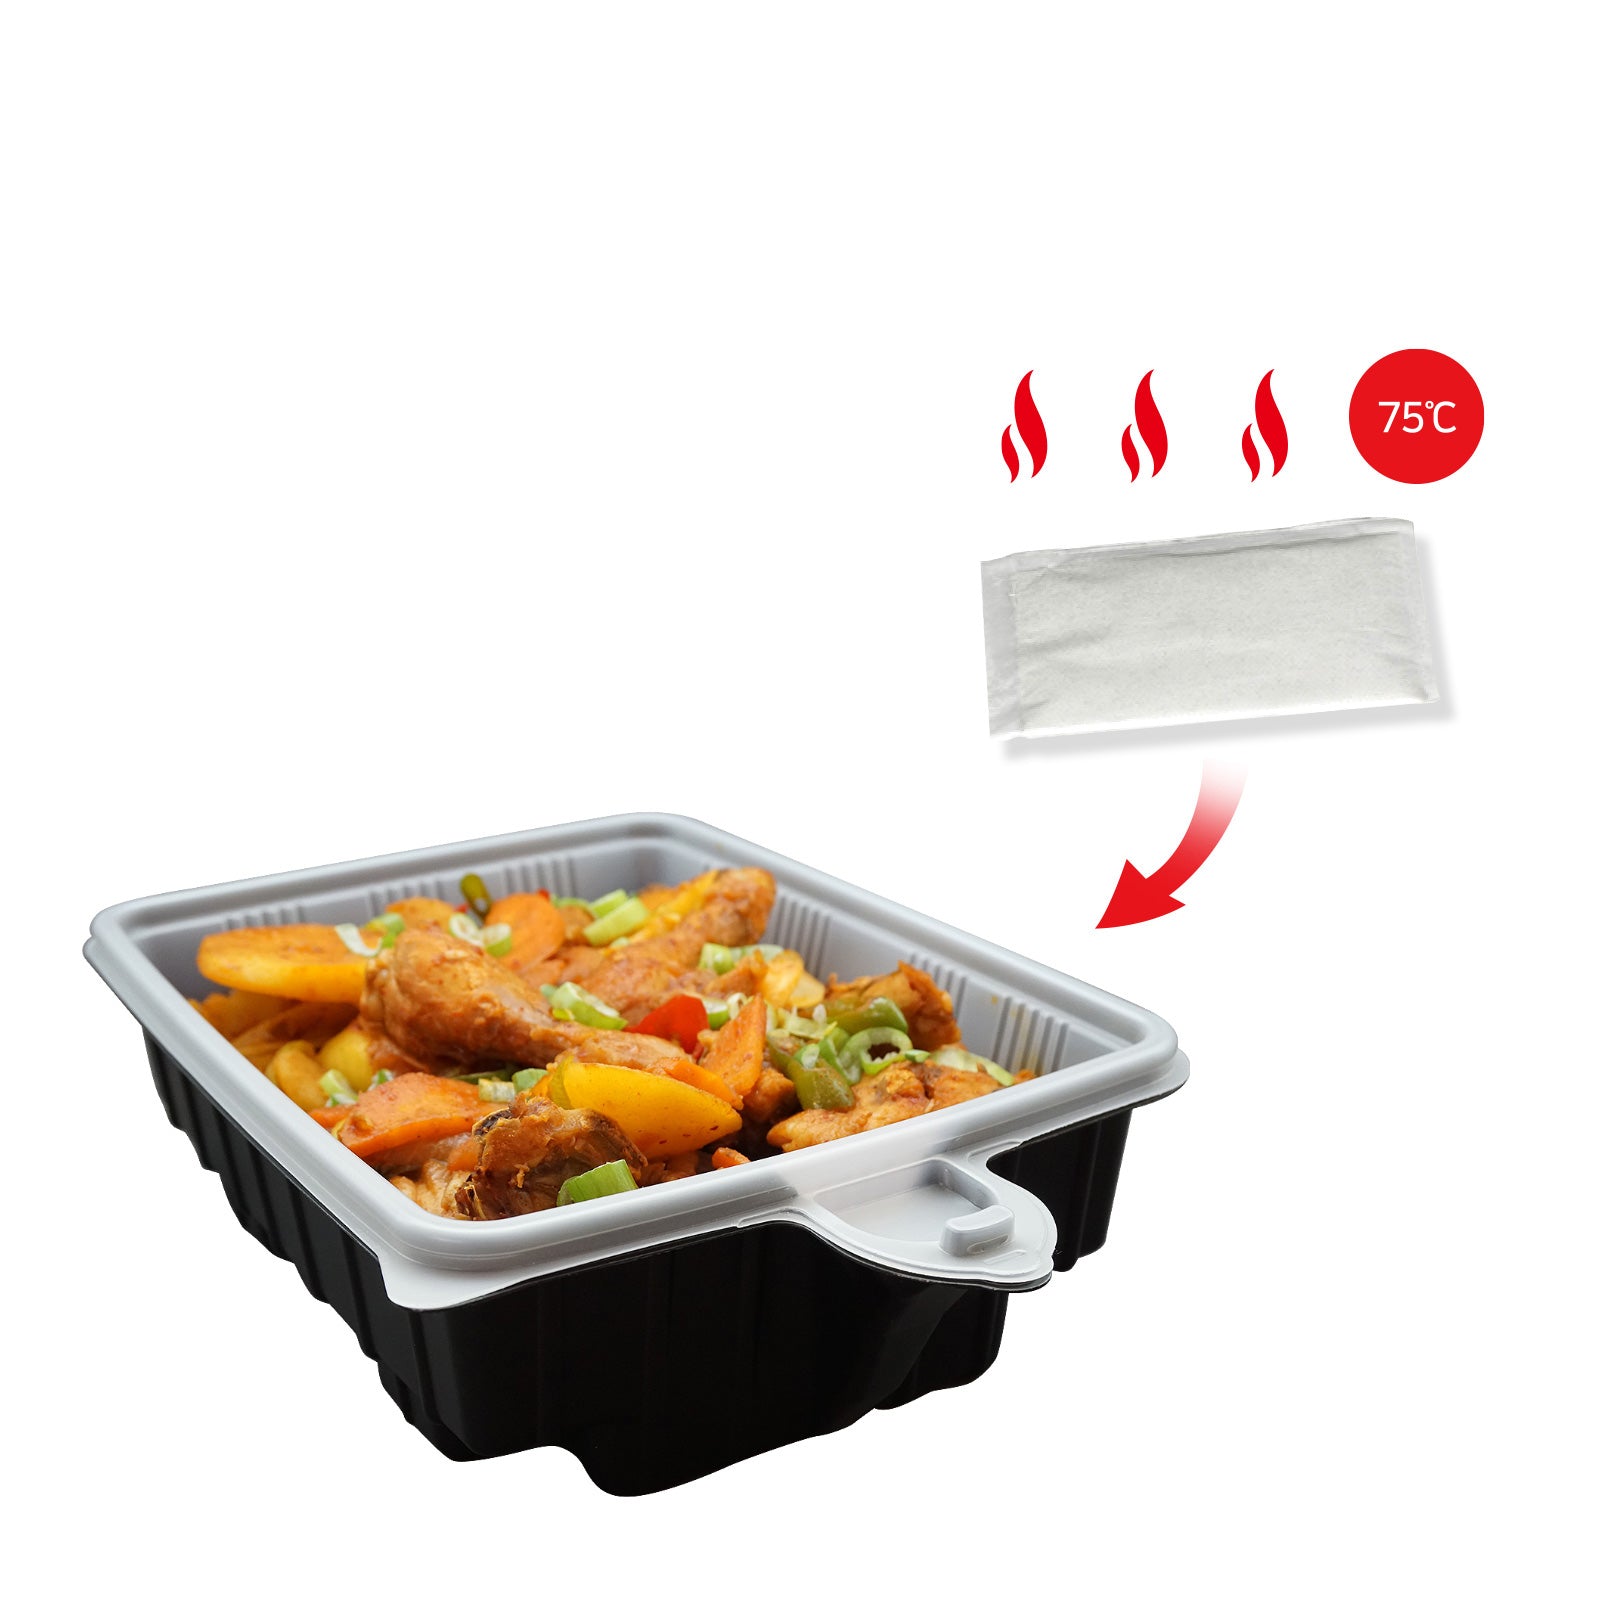 20 Pack Dalat Heating Lunch Box Container 33cm Rectangle + Heating Bag